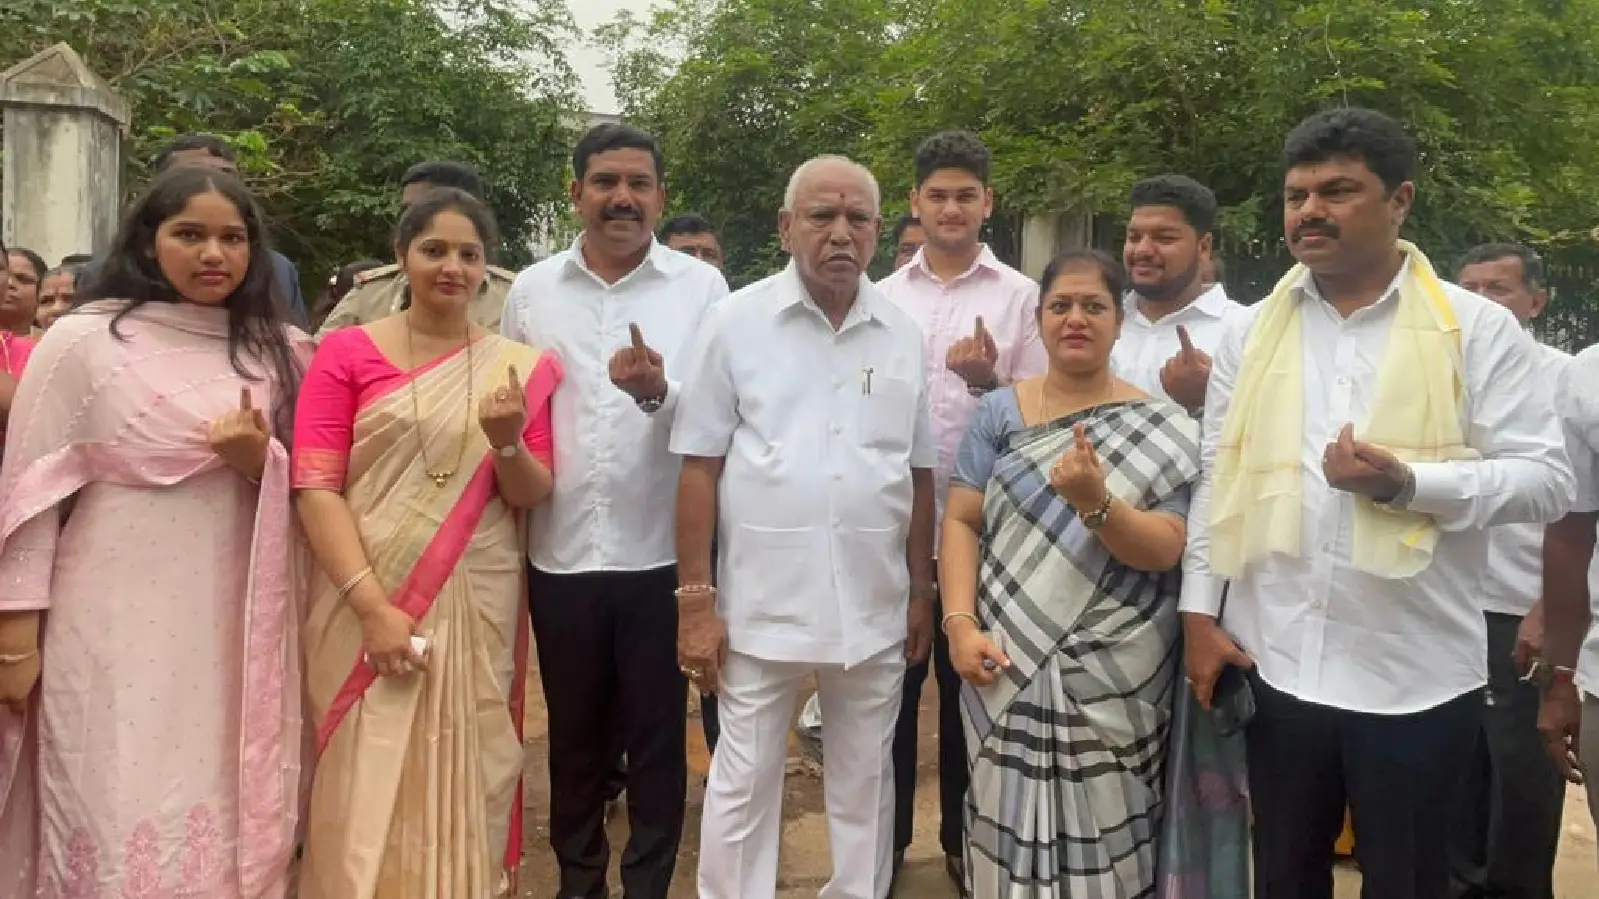 karnataka-election: BSY goes ot polling center with family